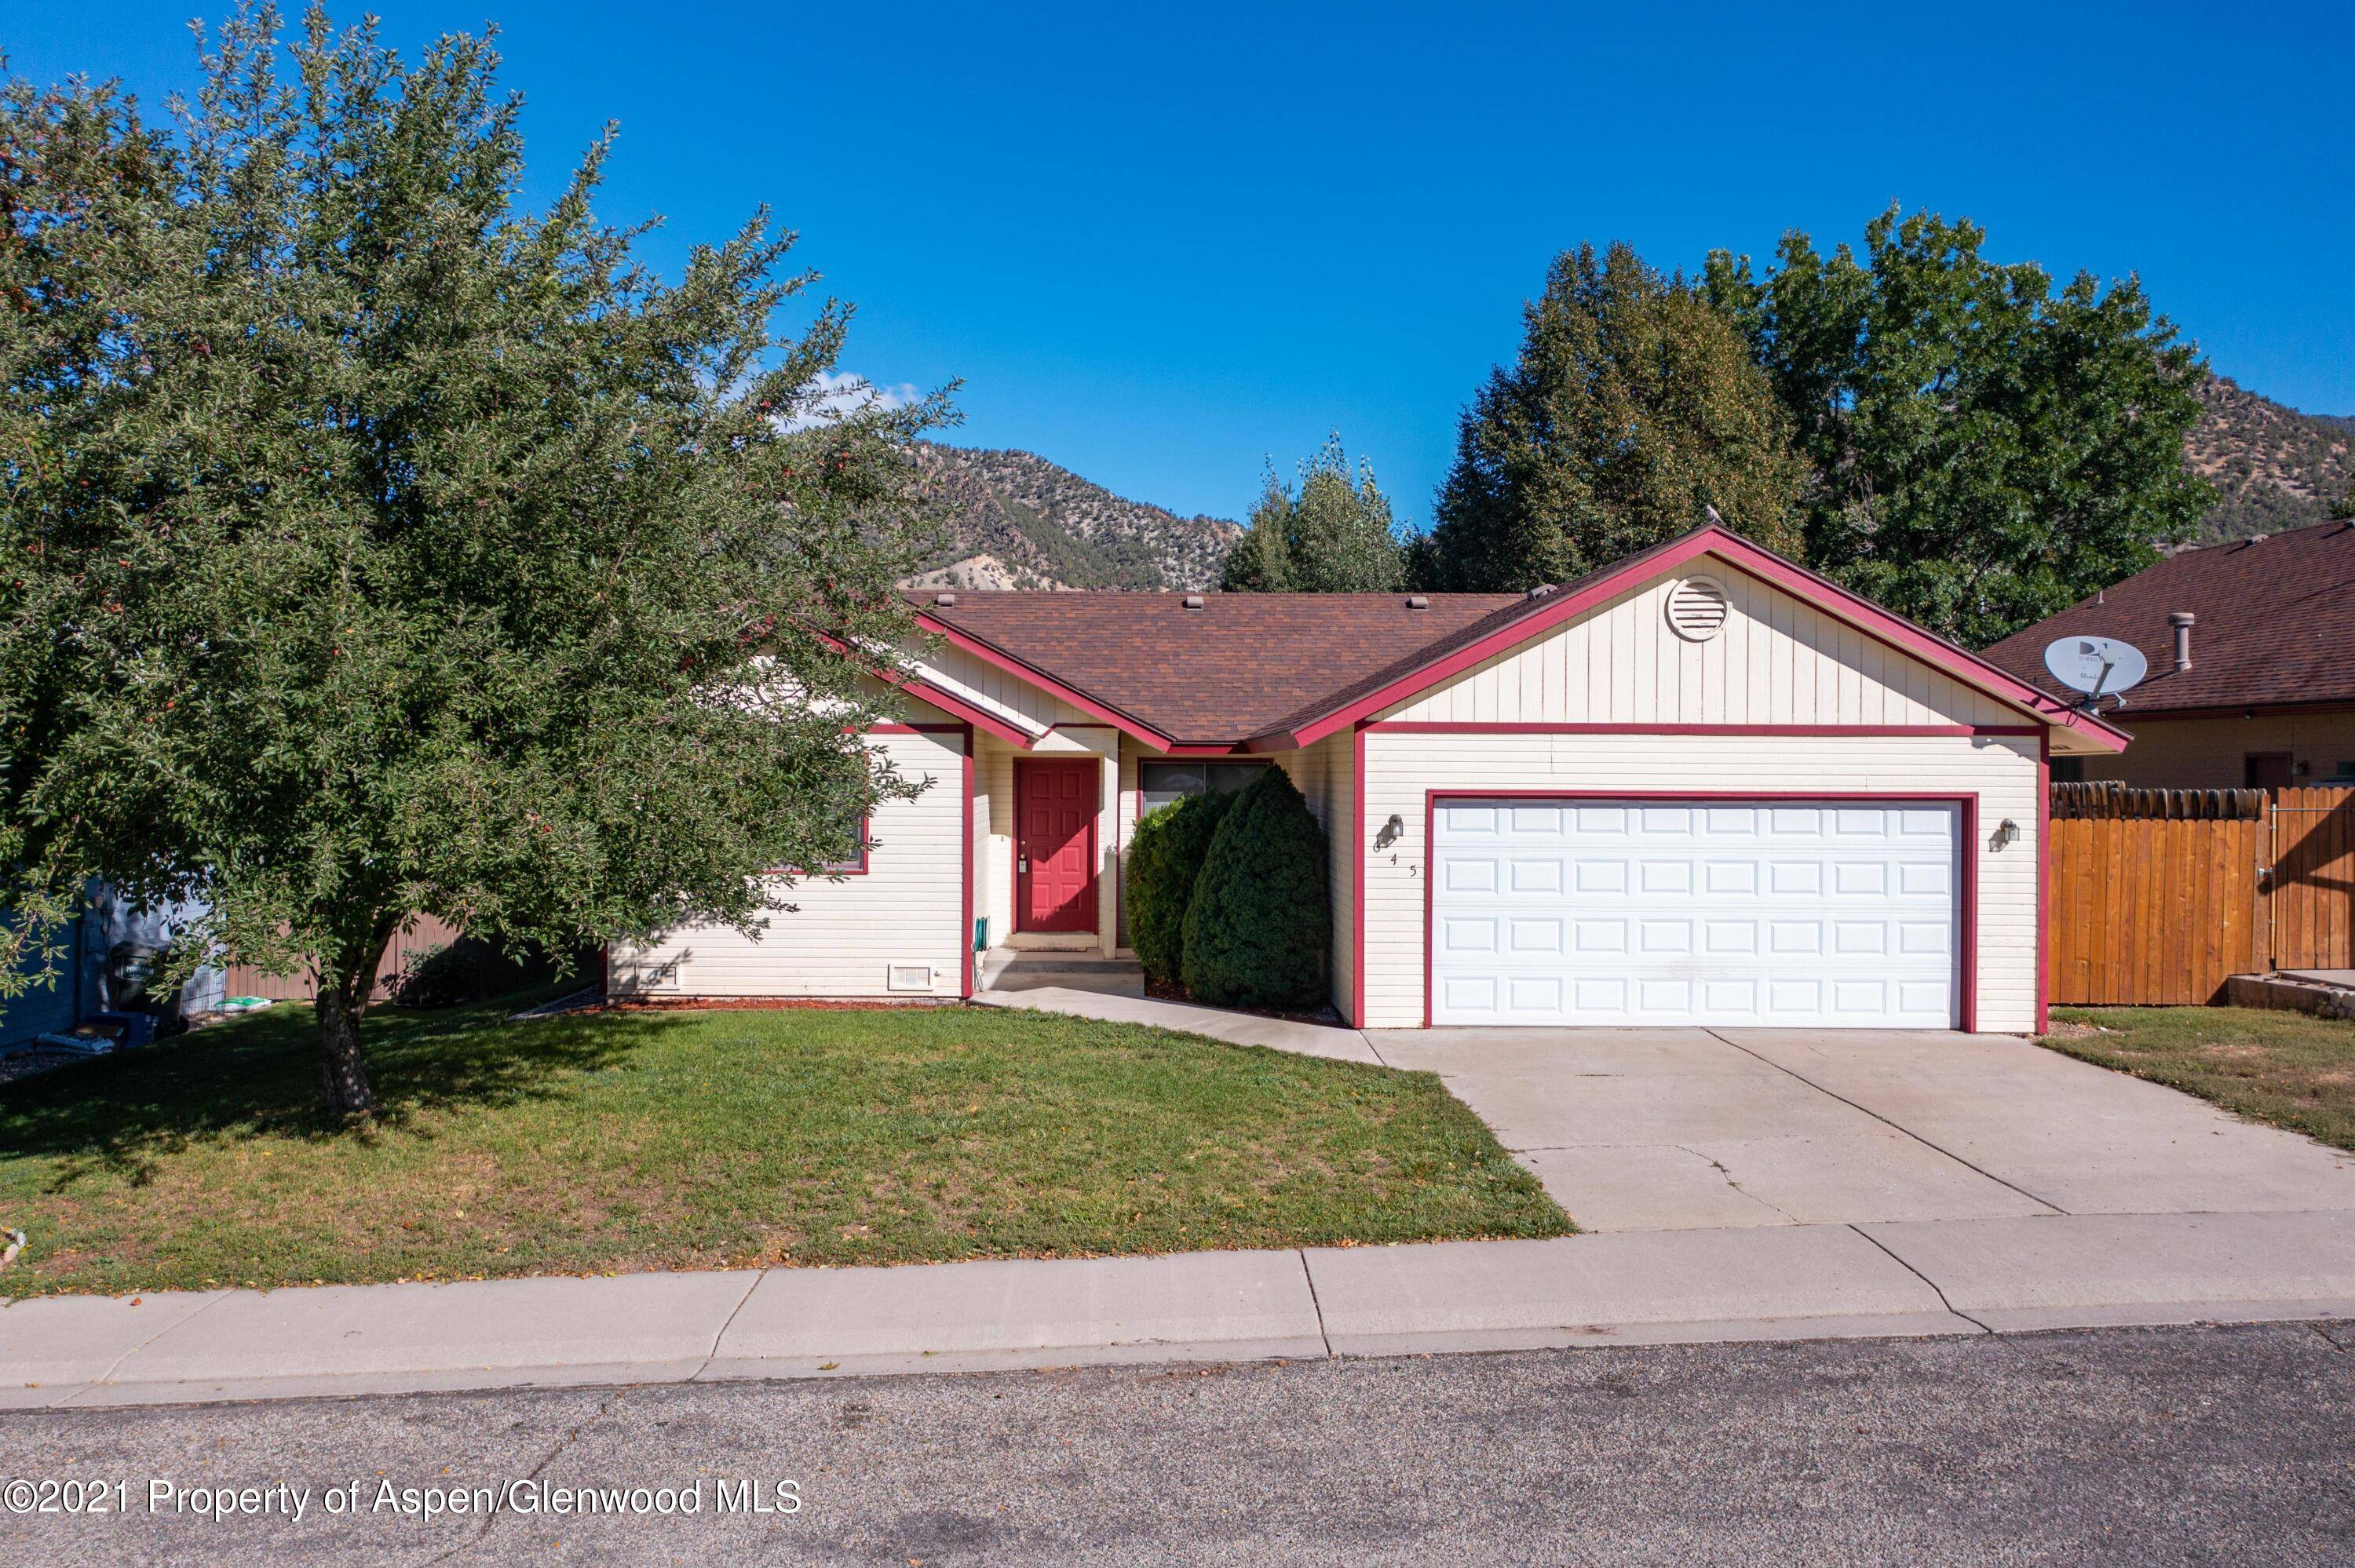 This charming single family home, tucked quietly away in the Castle Valley Ranch Subdivision could be the start of your next Colorado adventure.